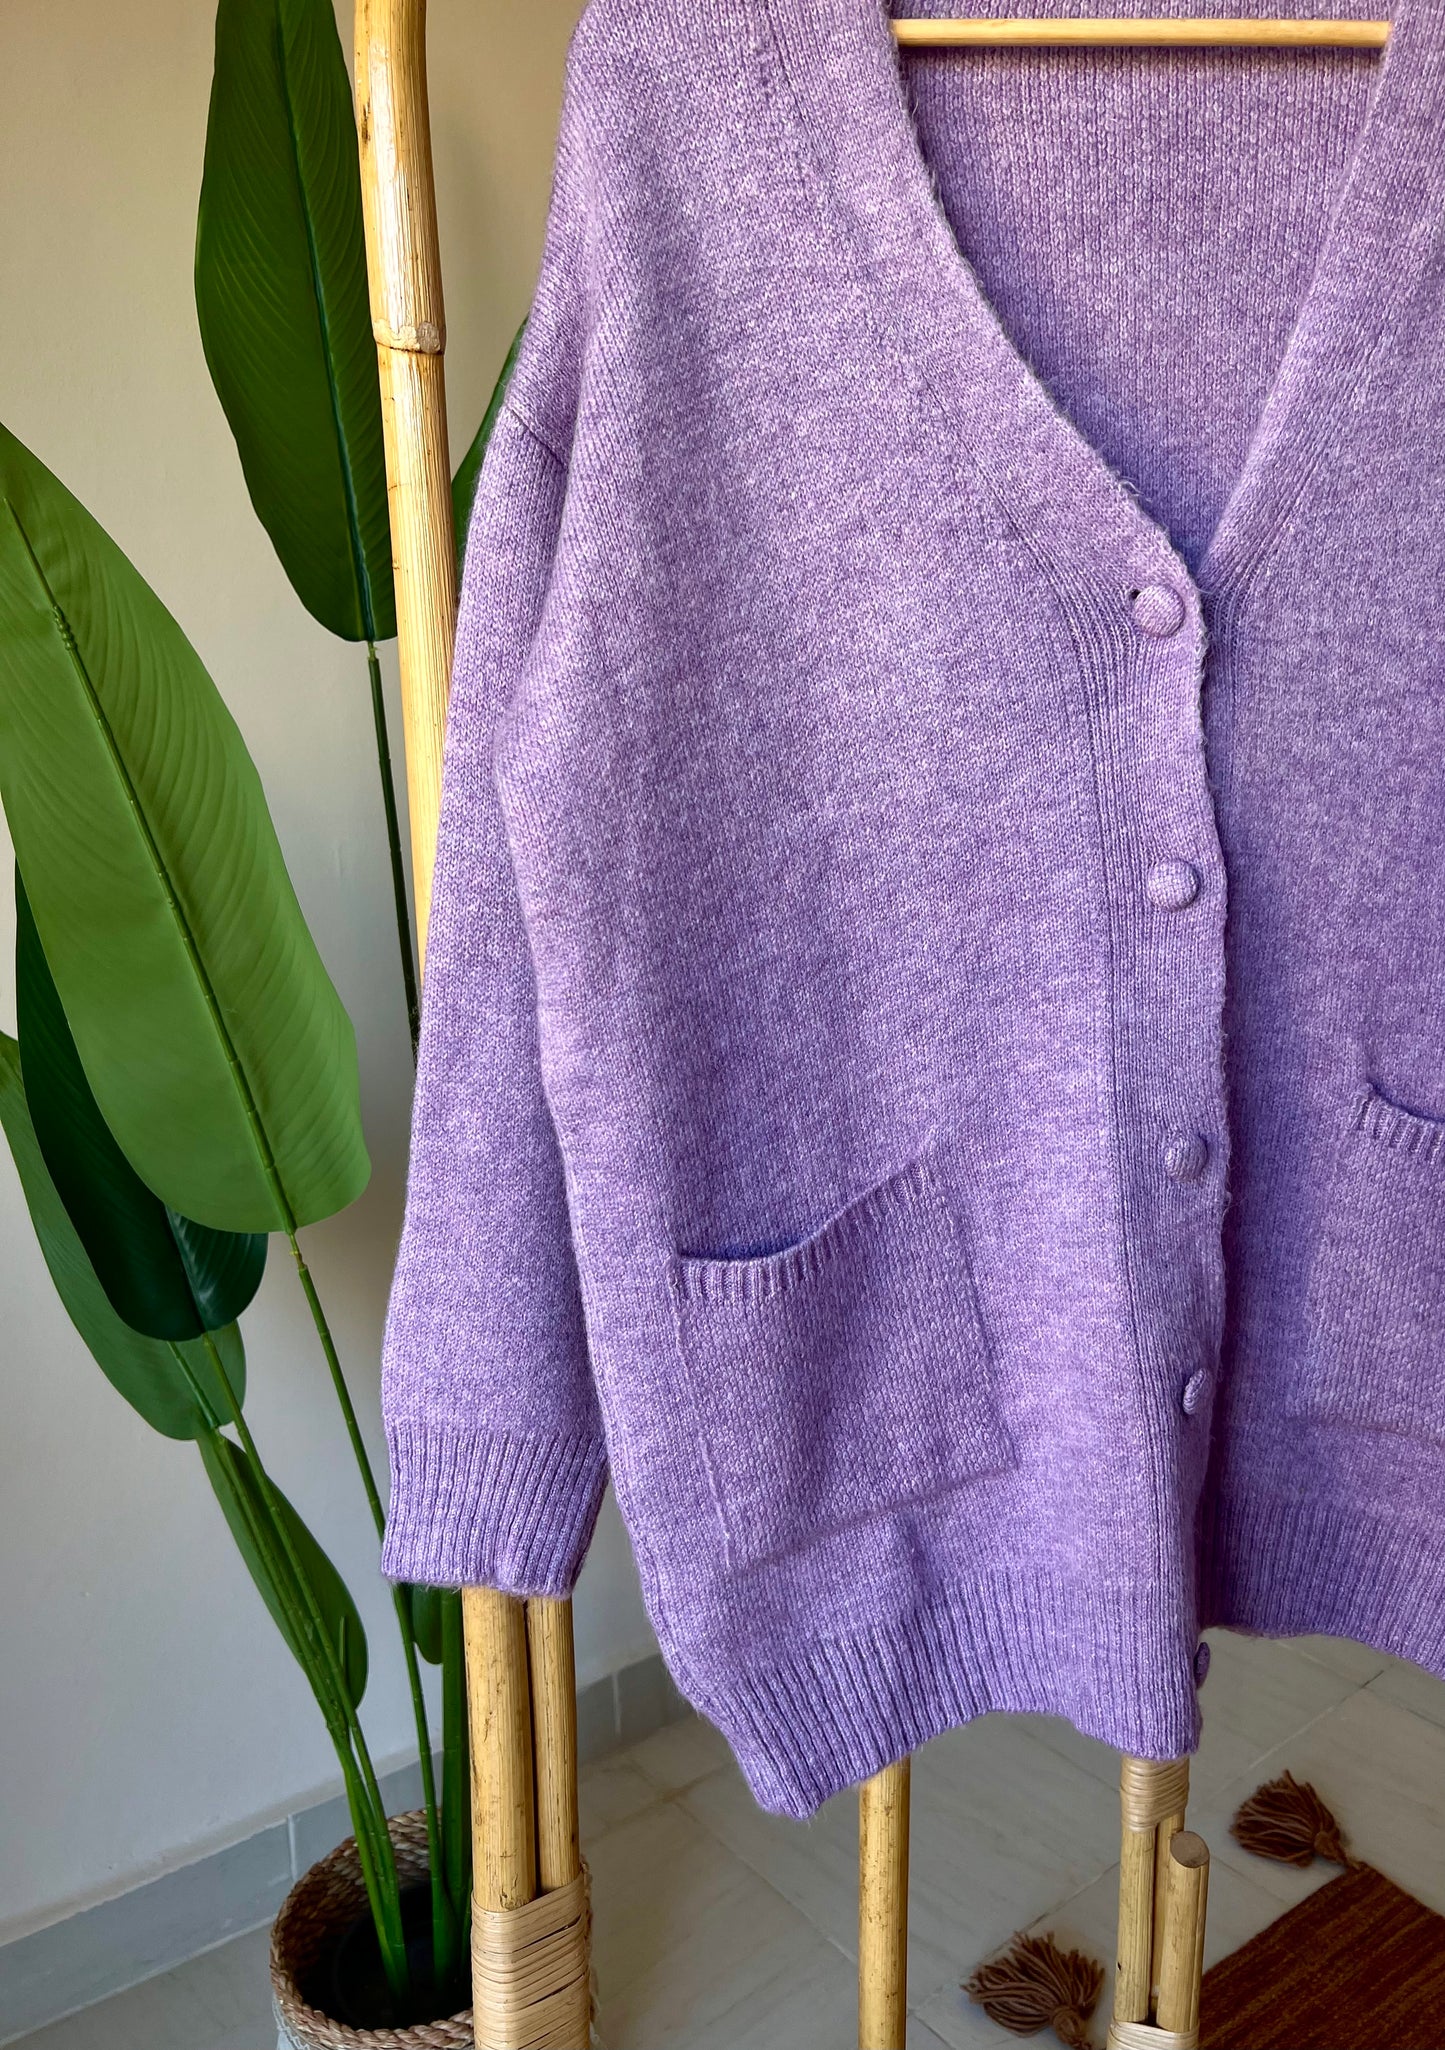 Lilac Double Pockets Knitted Cardigan